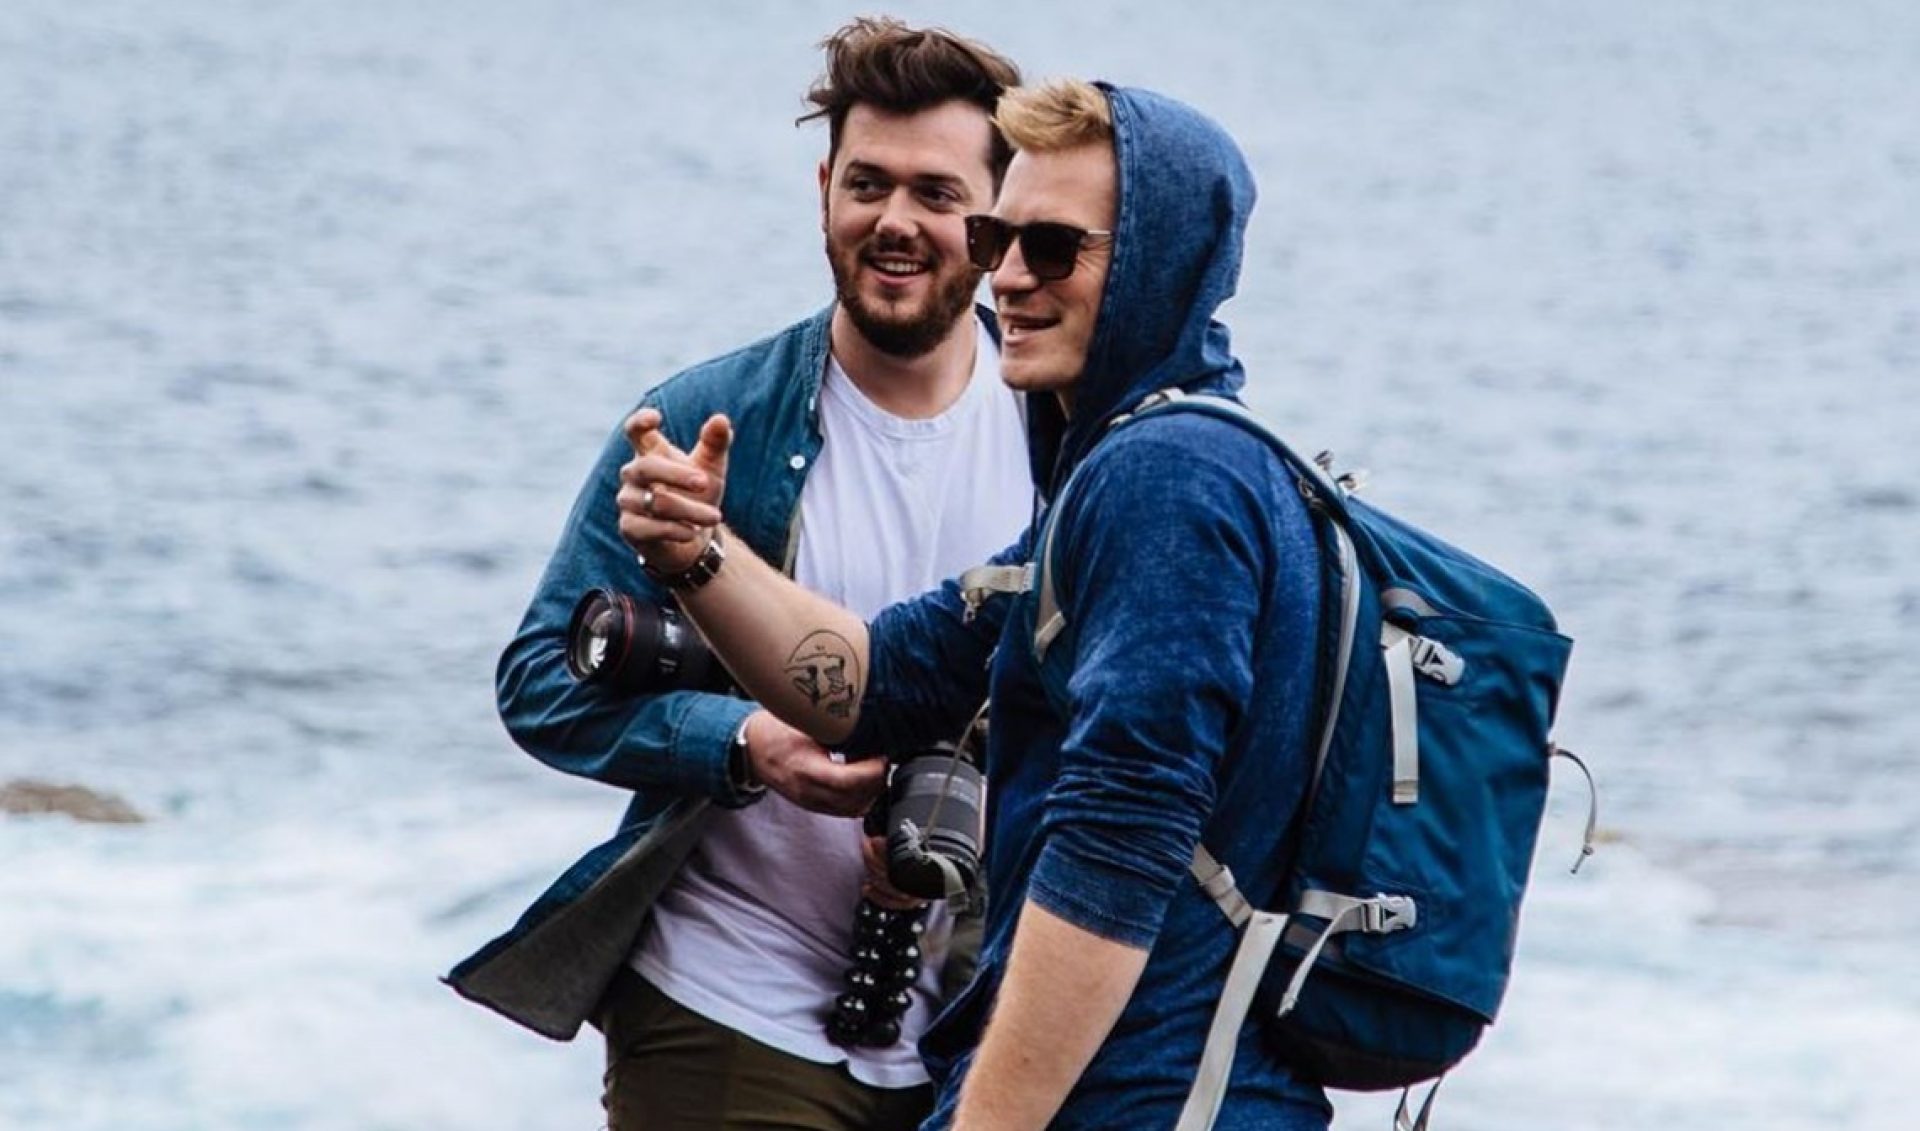 U.K. Vloggers Ben Brown And Steve Booker Premiere Travel Photography Series With BBC